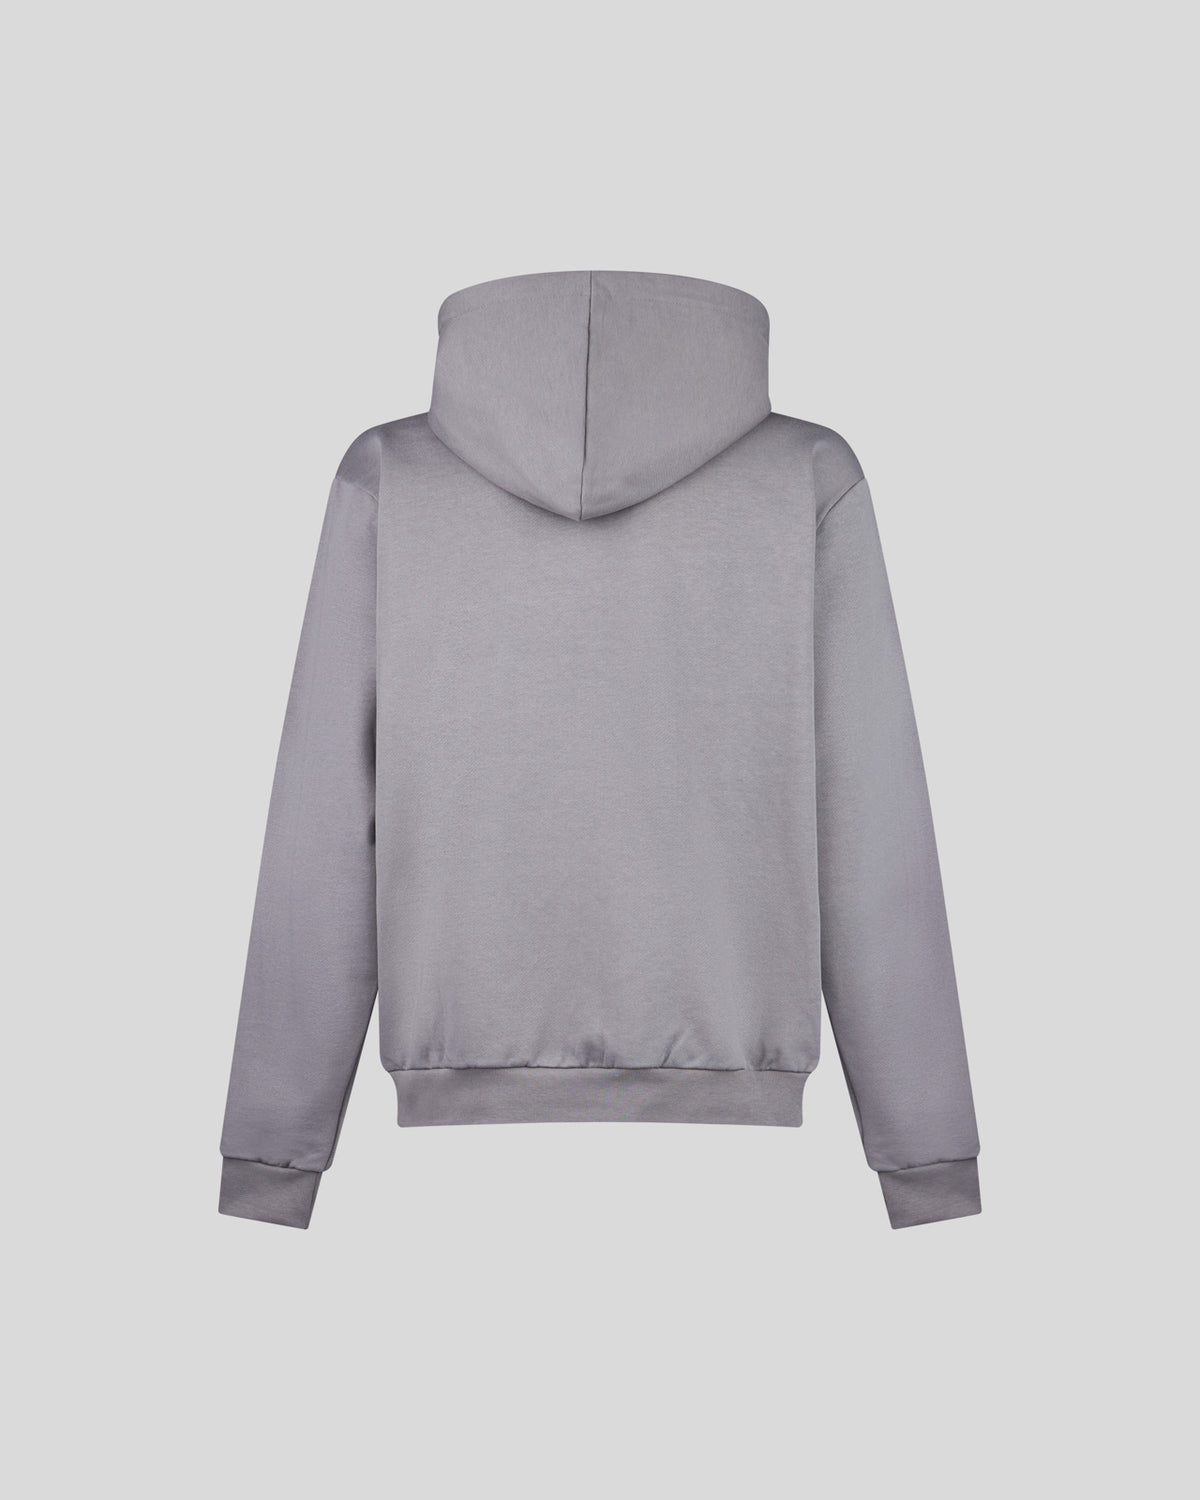 PHOBIA GREY HOODIE WITH WHITE EMBROIDERY LIGHTNING